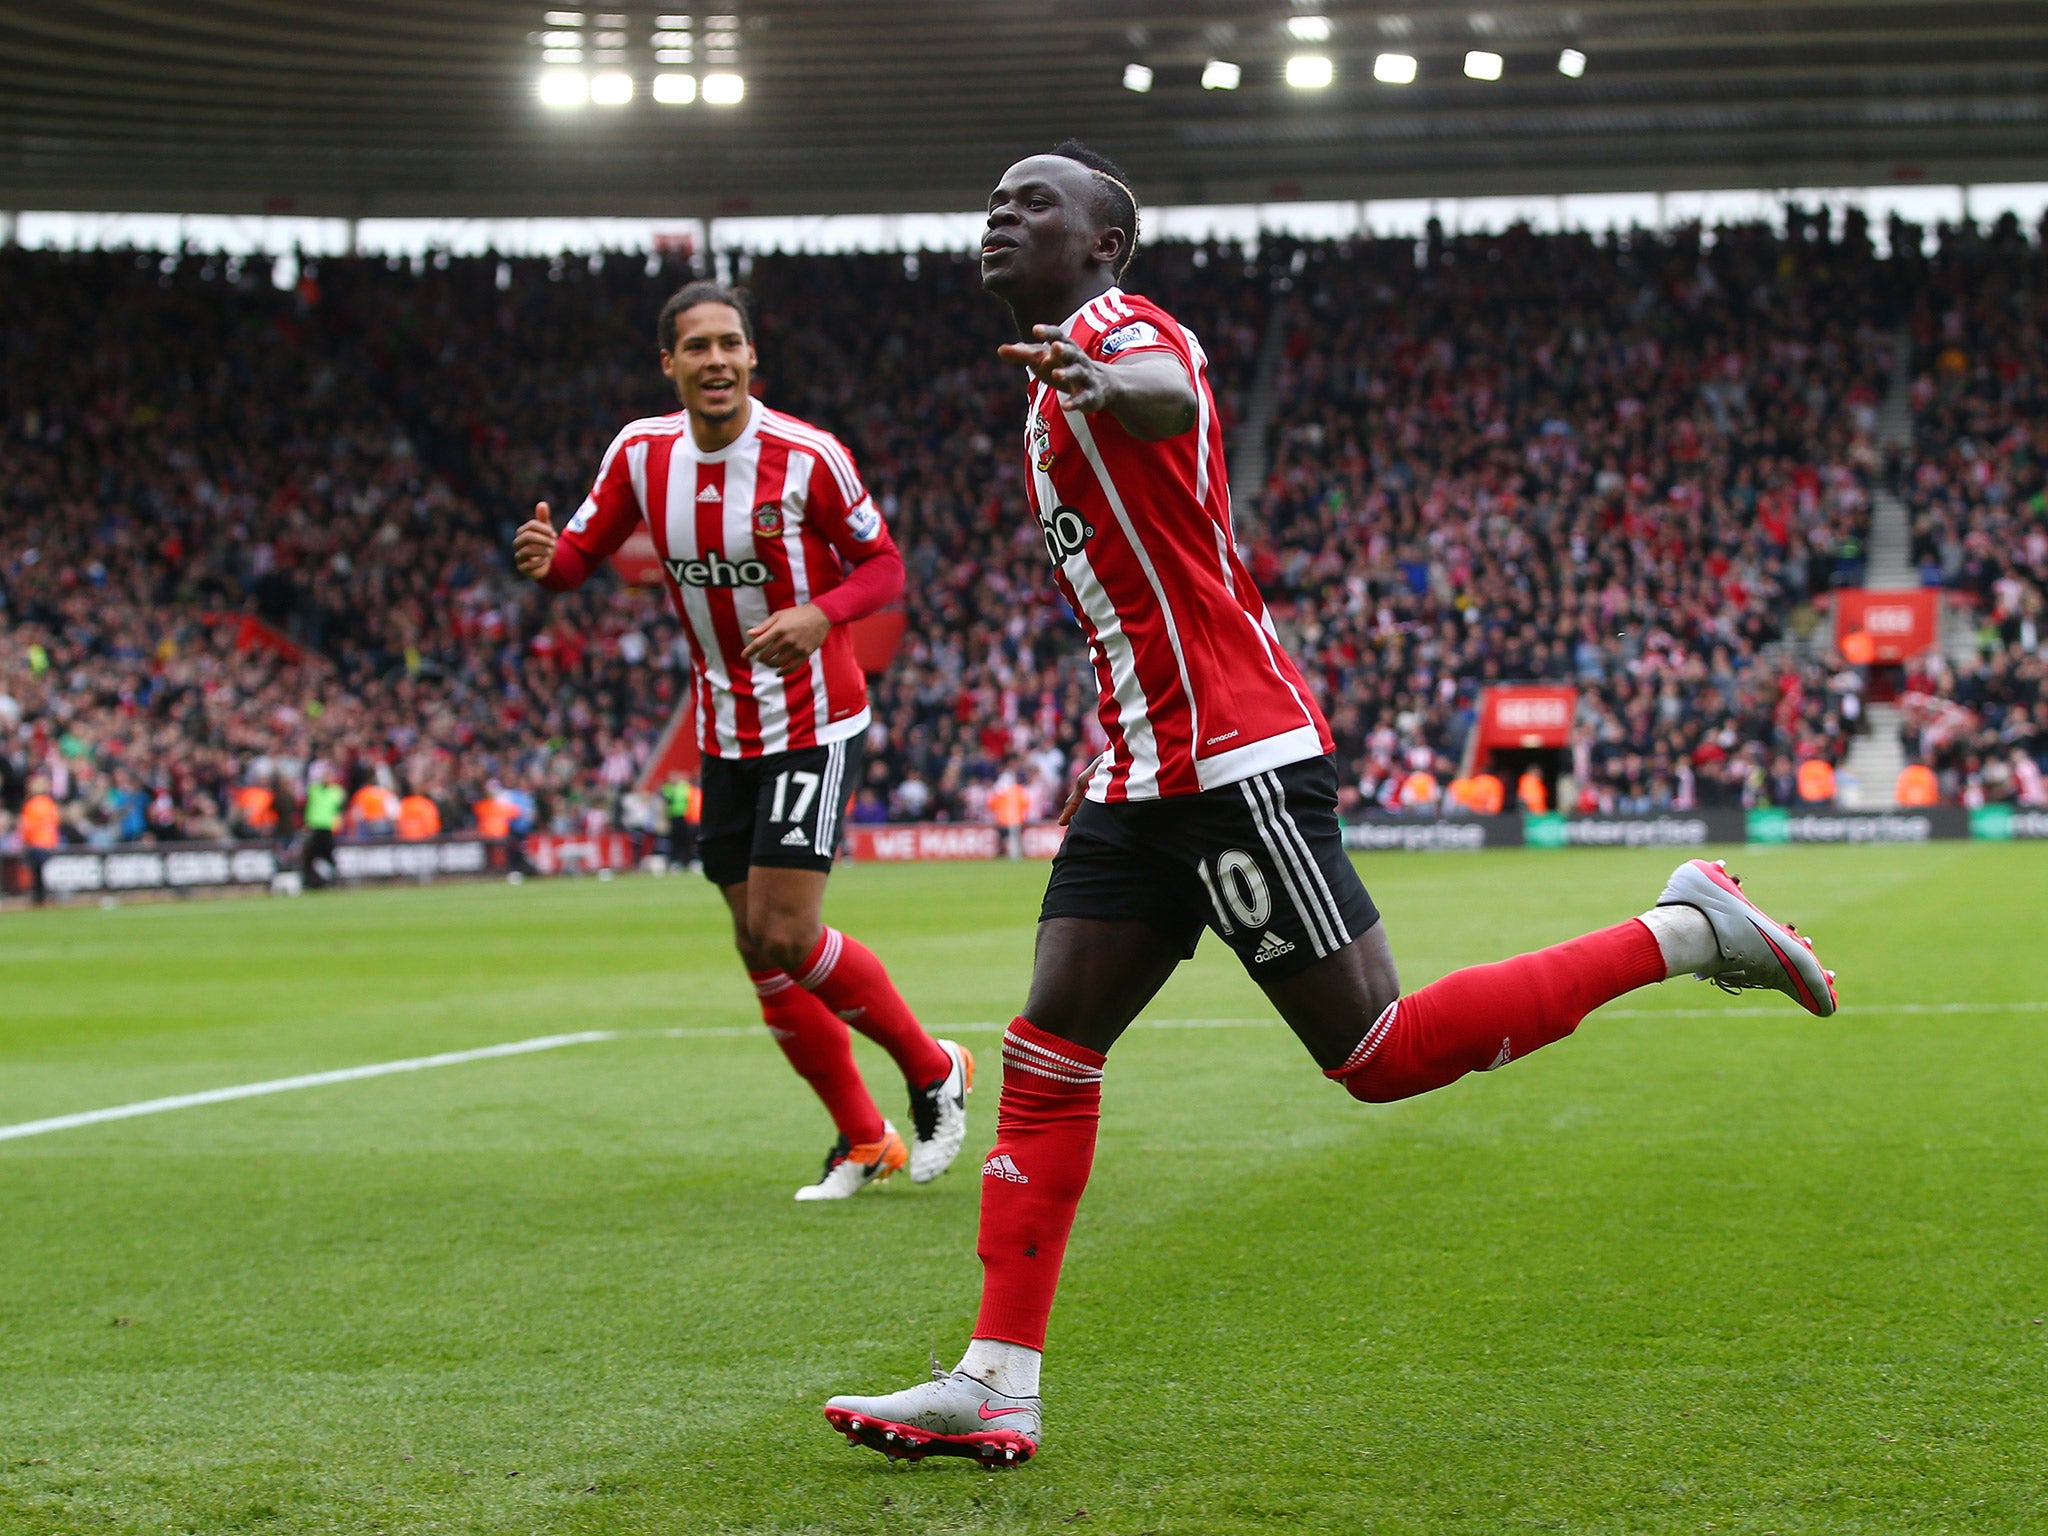 Sadio Mane, who scored a hat-trick against Manchester City.